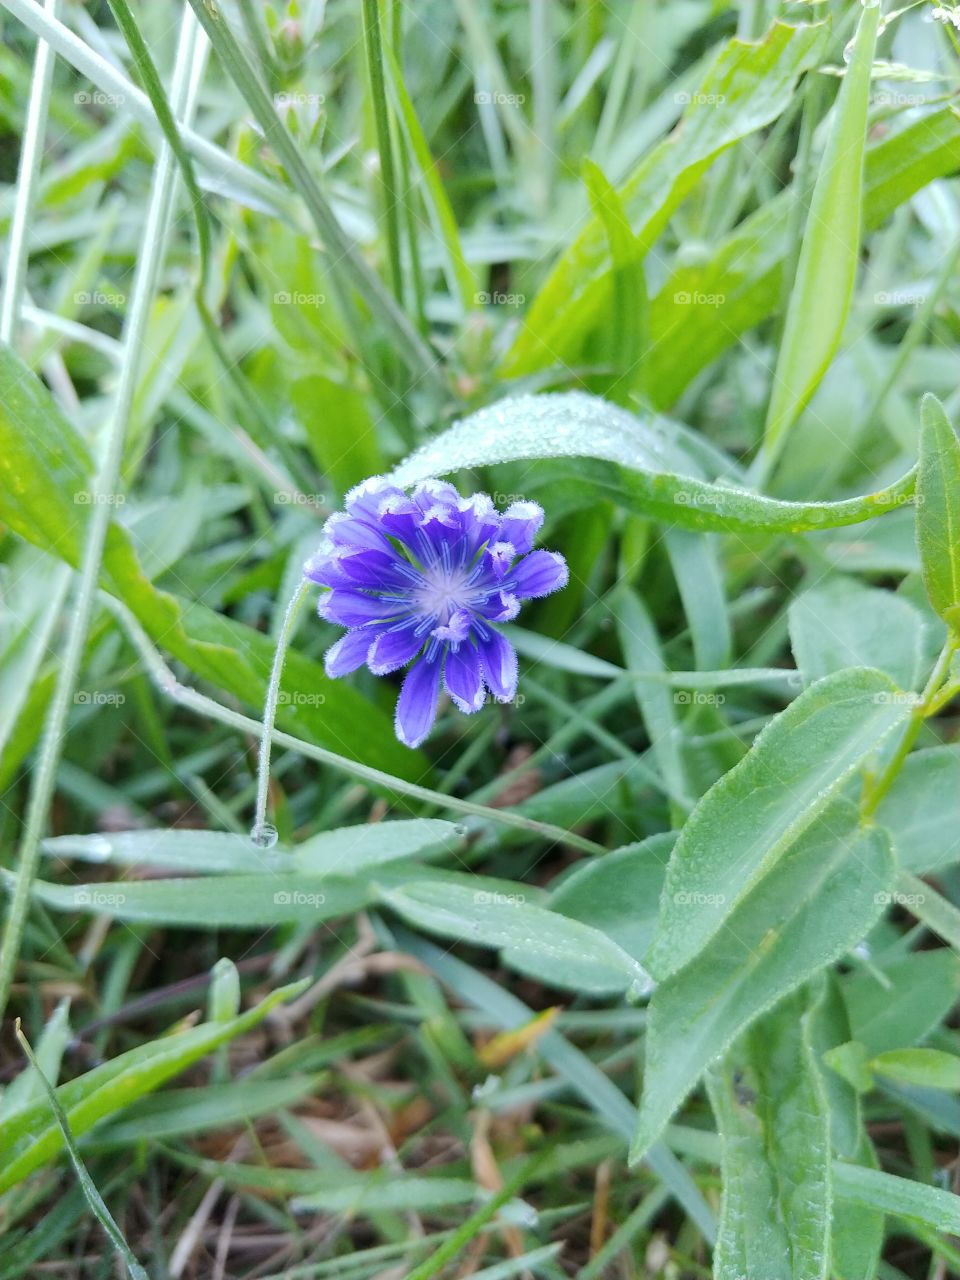 just a cute little flower that i saw this morning before the sun came fully up. its now fully bloomed.